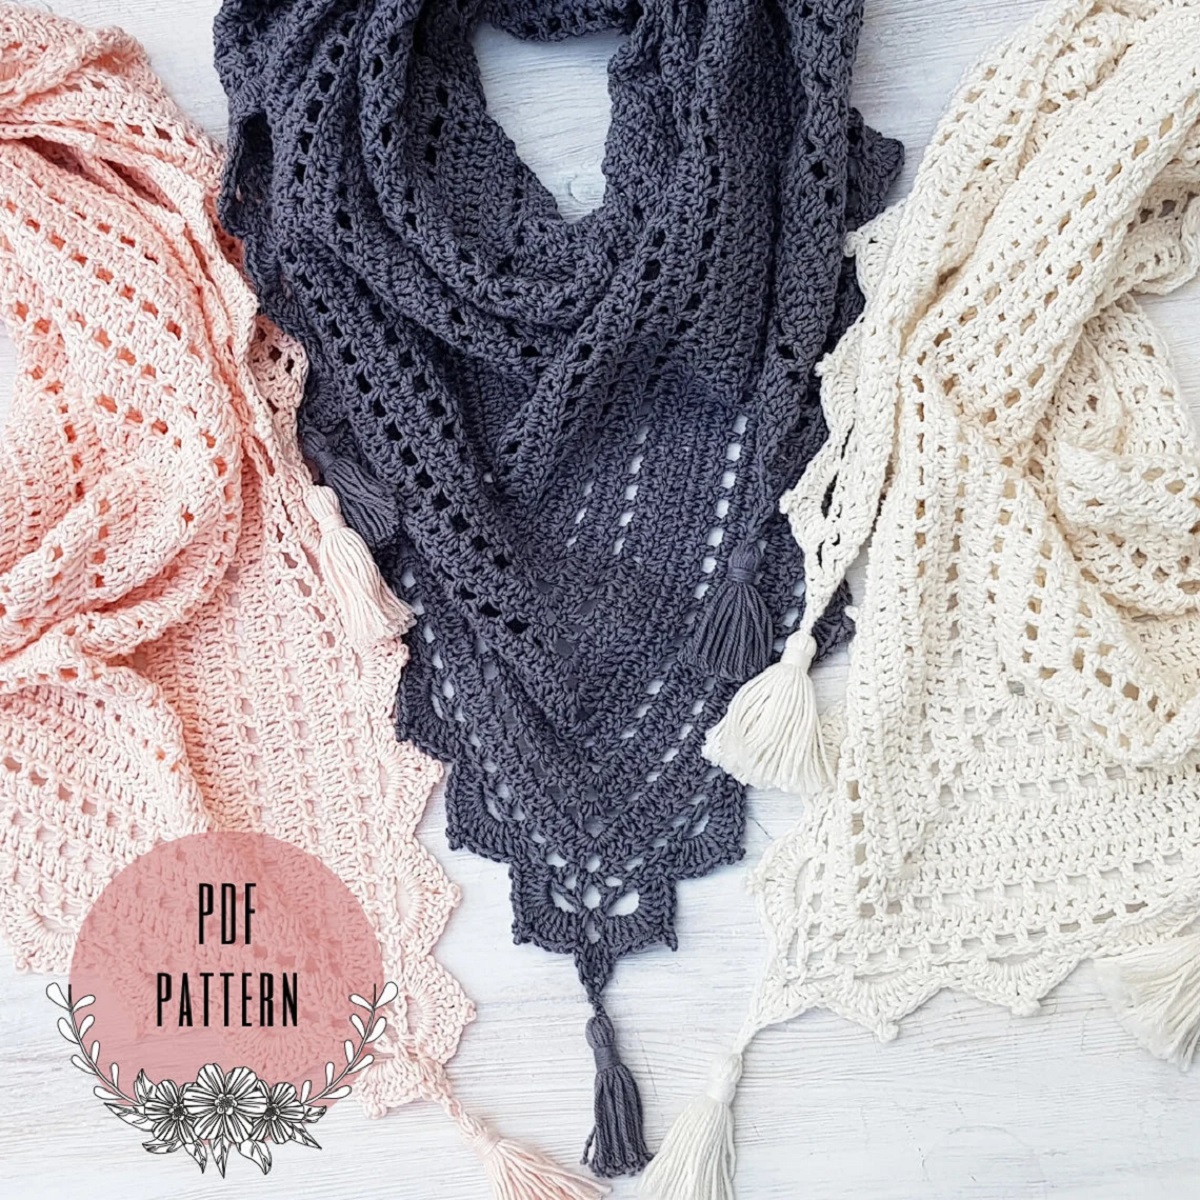 Pale pink, gray, and cream crochet shawls with a zig-zag trim and a tassel at the bottom laying next to each other.